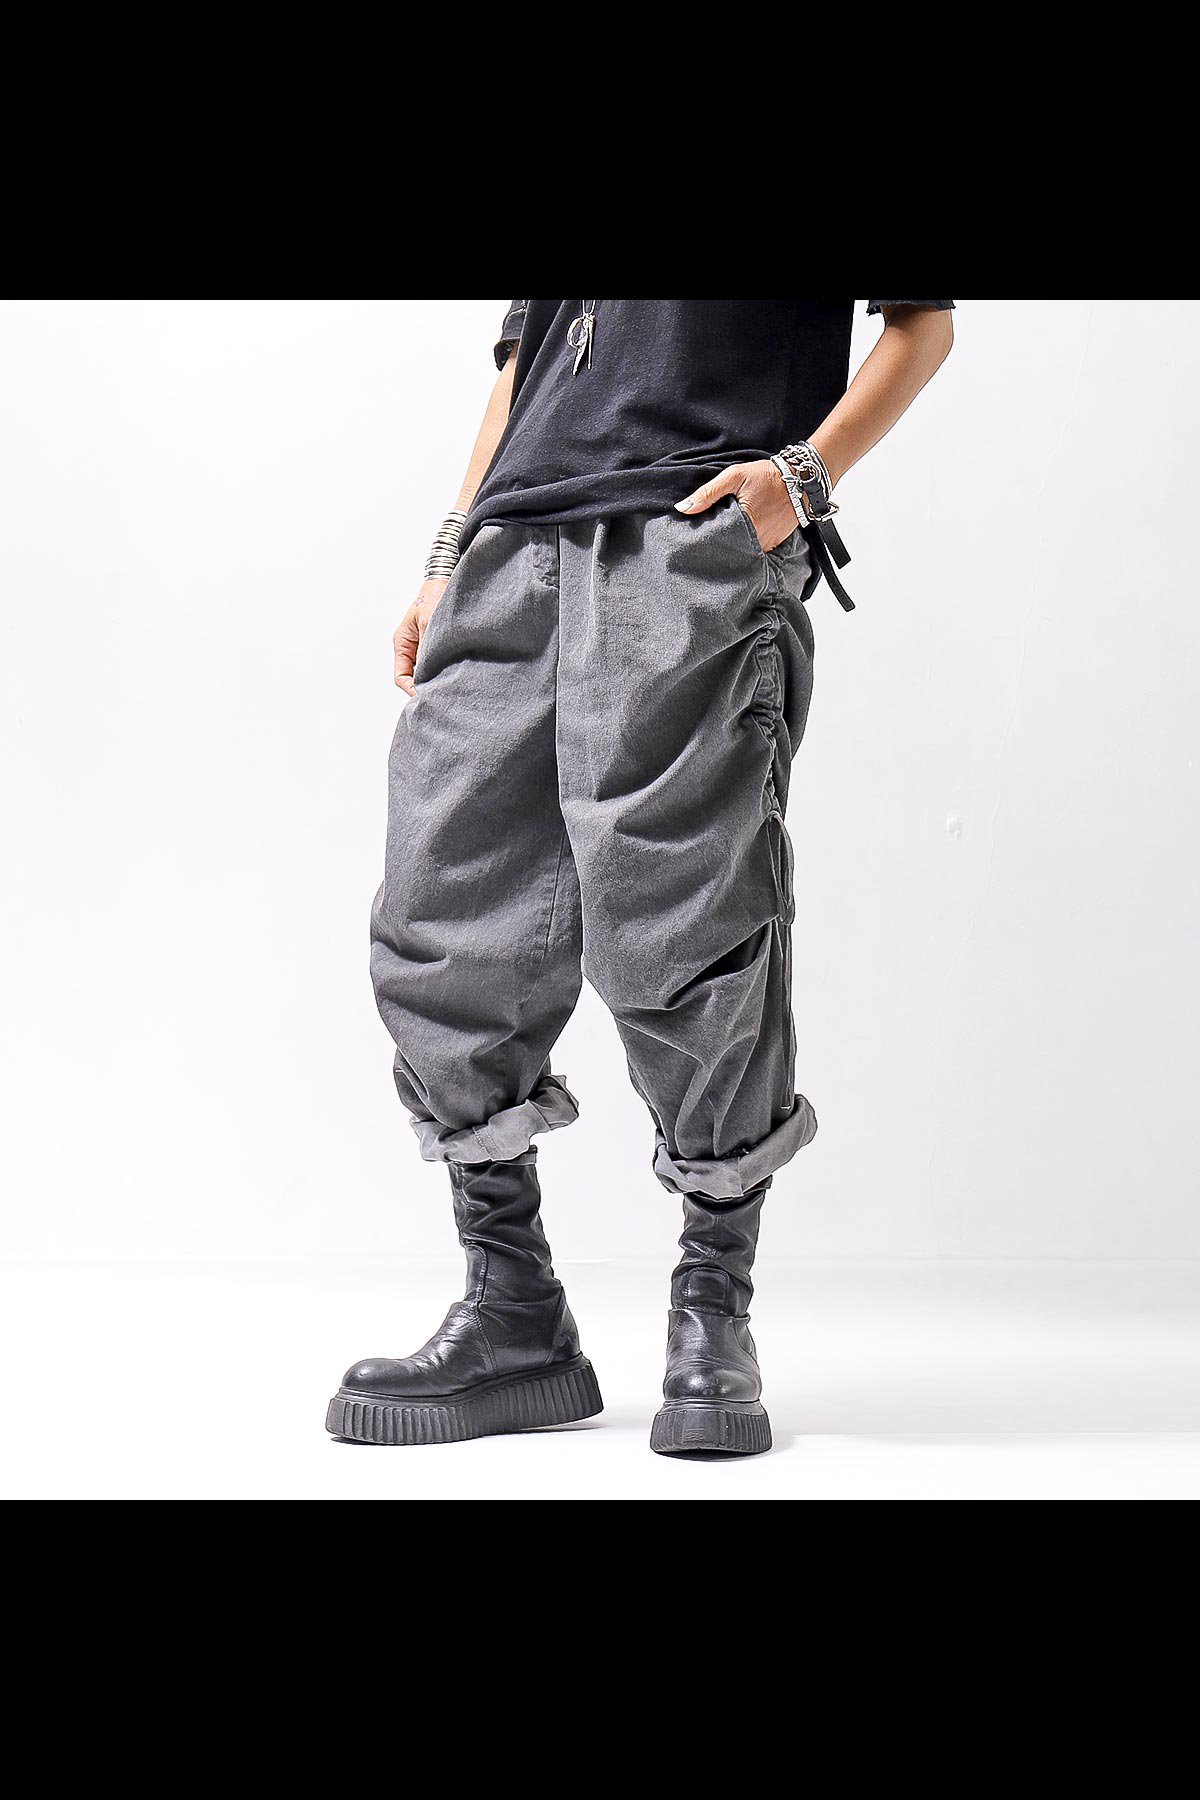 <img class='new_mark_img1' src='https://img.shop-pro.jp/img/new/icons8.gif' style='border:none;display:inline;margin:0px;padding:0px;width:auto;' />UNISEX SIDE STRING CODE PANTS 319/MM_DARK GREY WASH